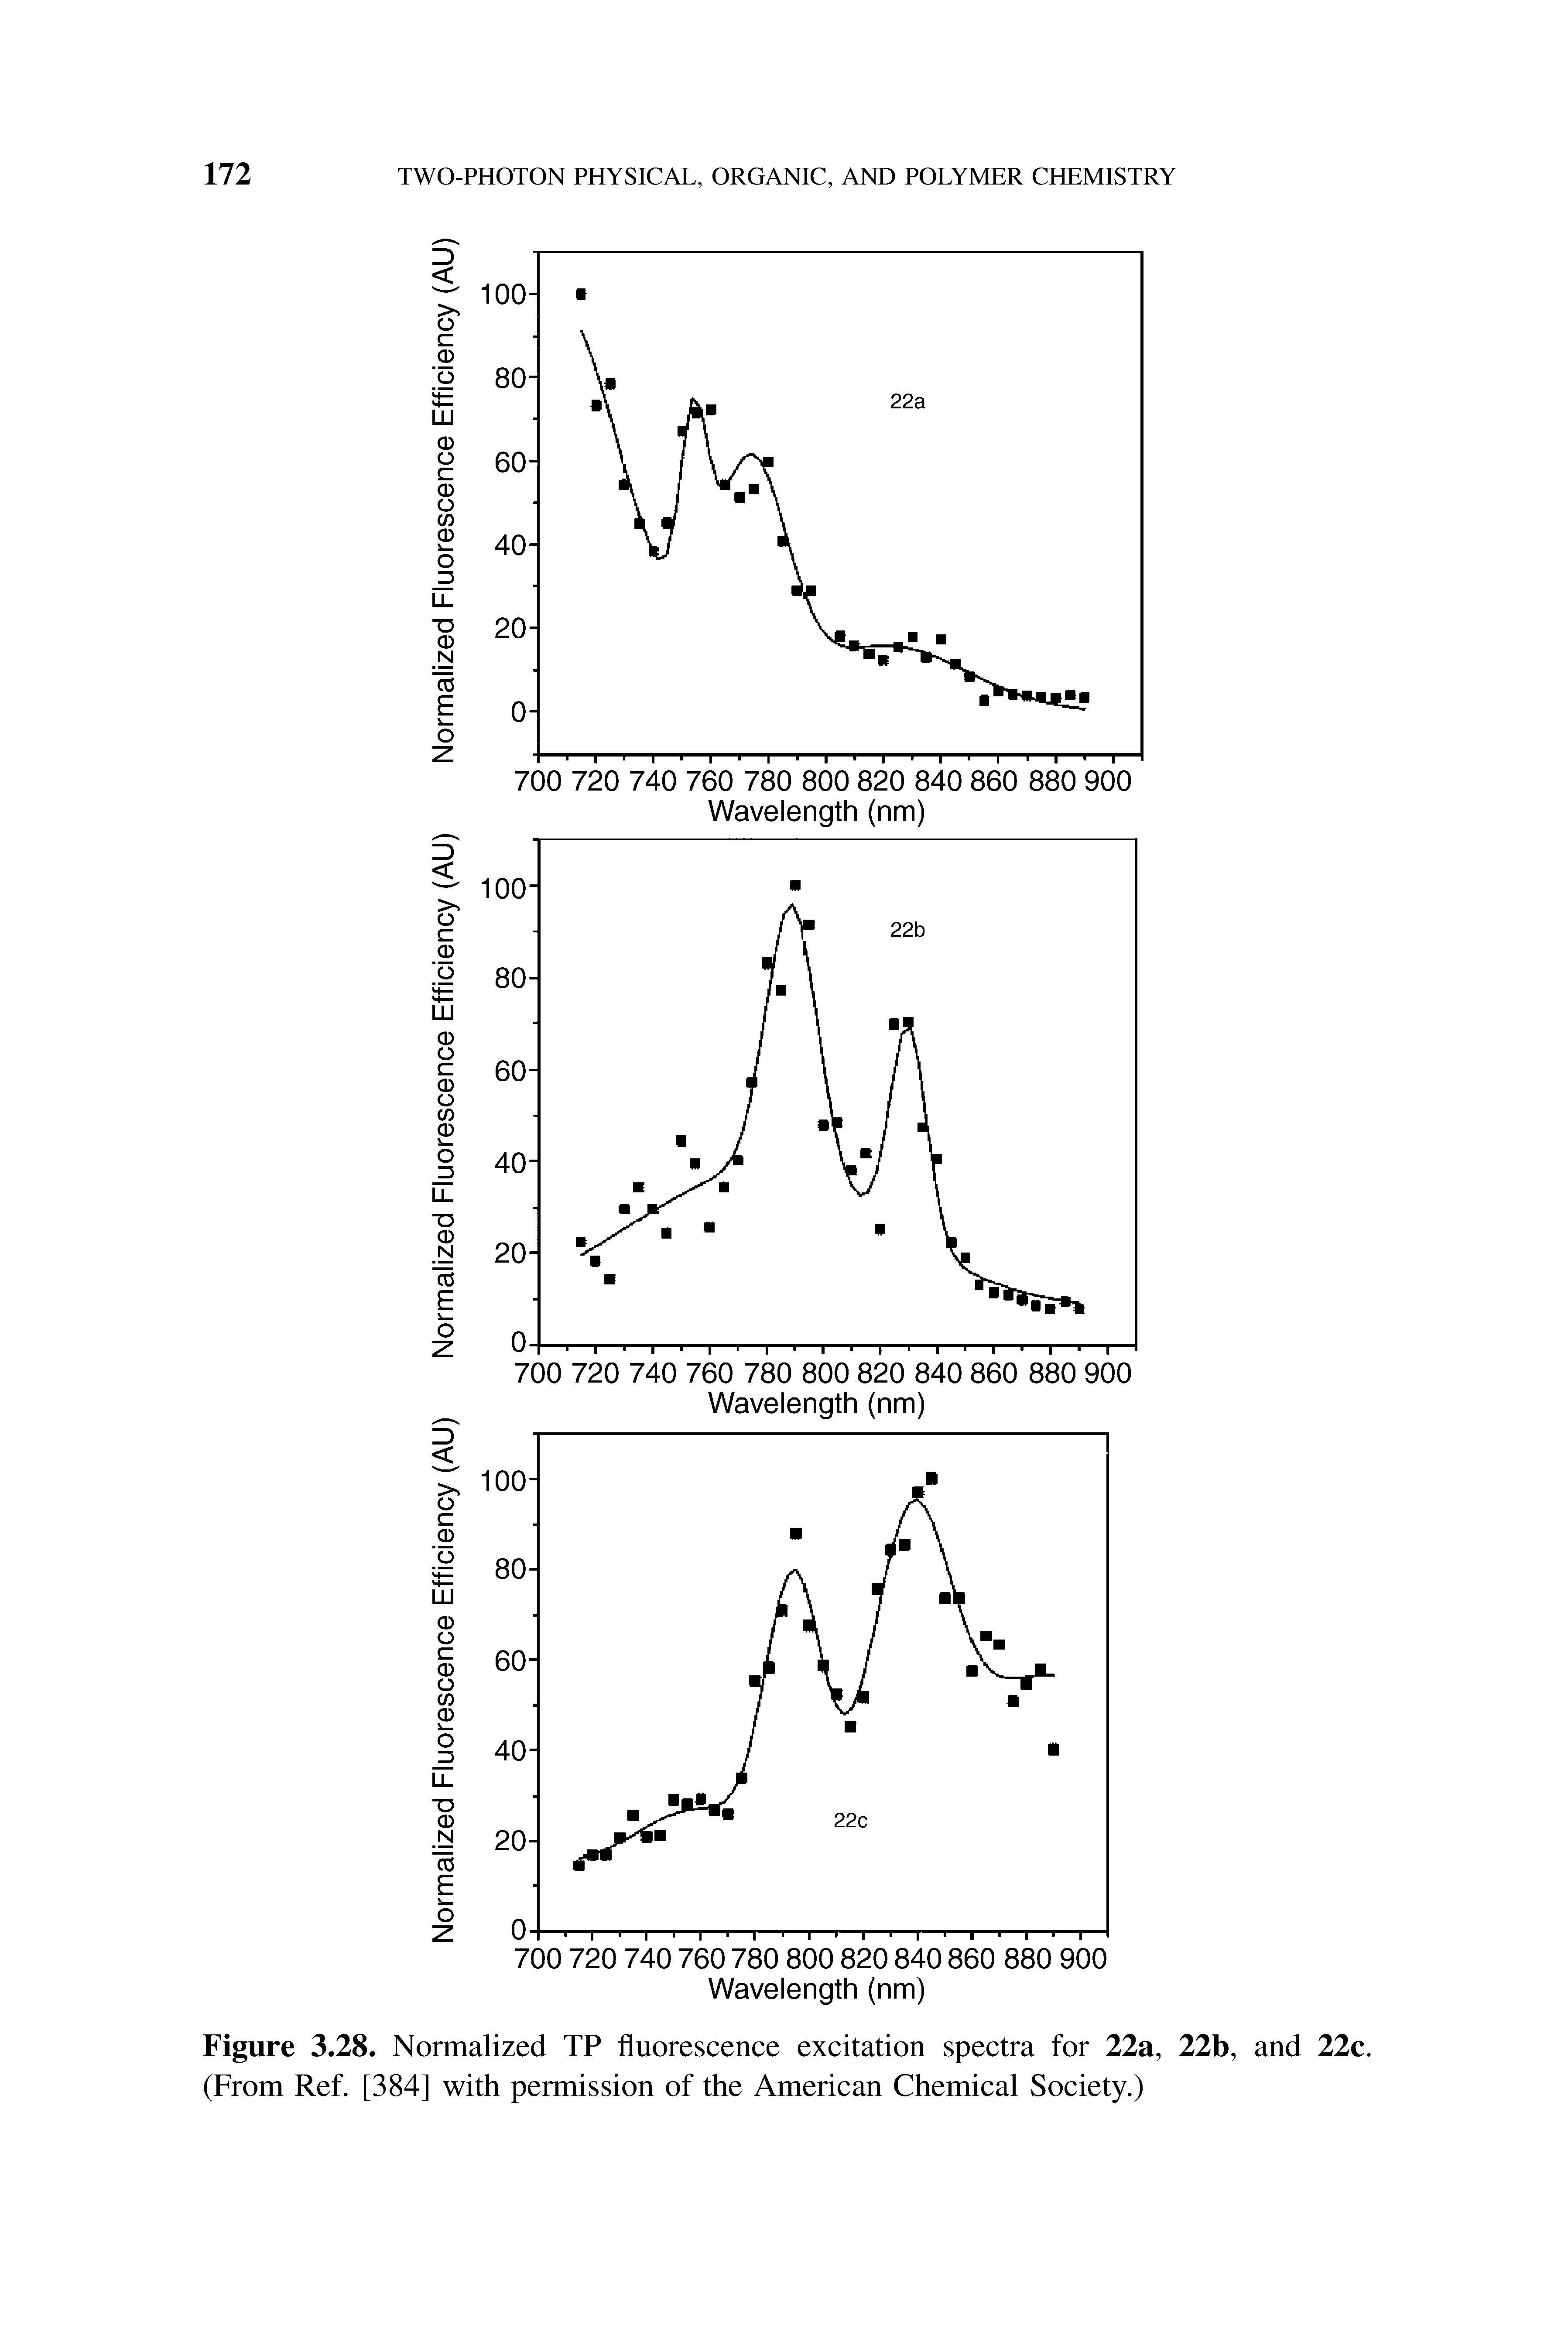 Figure 3.28. Normalized TP fluorescence excitation spectra for 22a, 22b, and 22c. (From Ref. [384] with permission of the American Chemical Society.)...